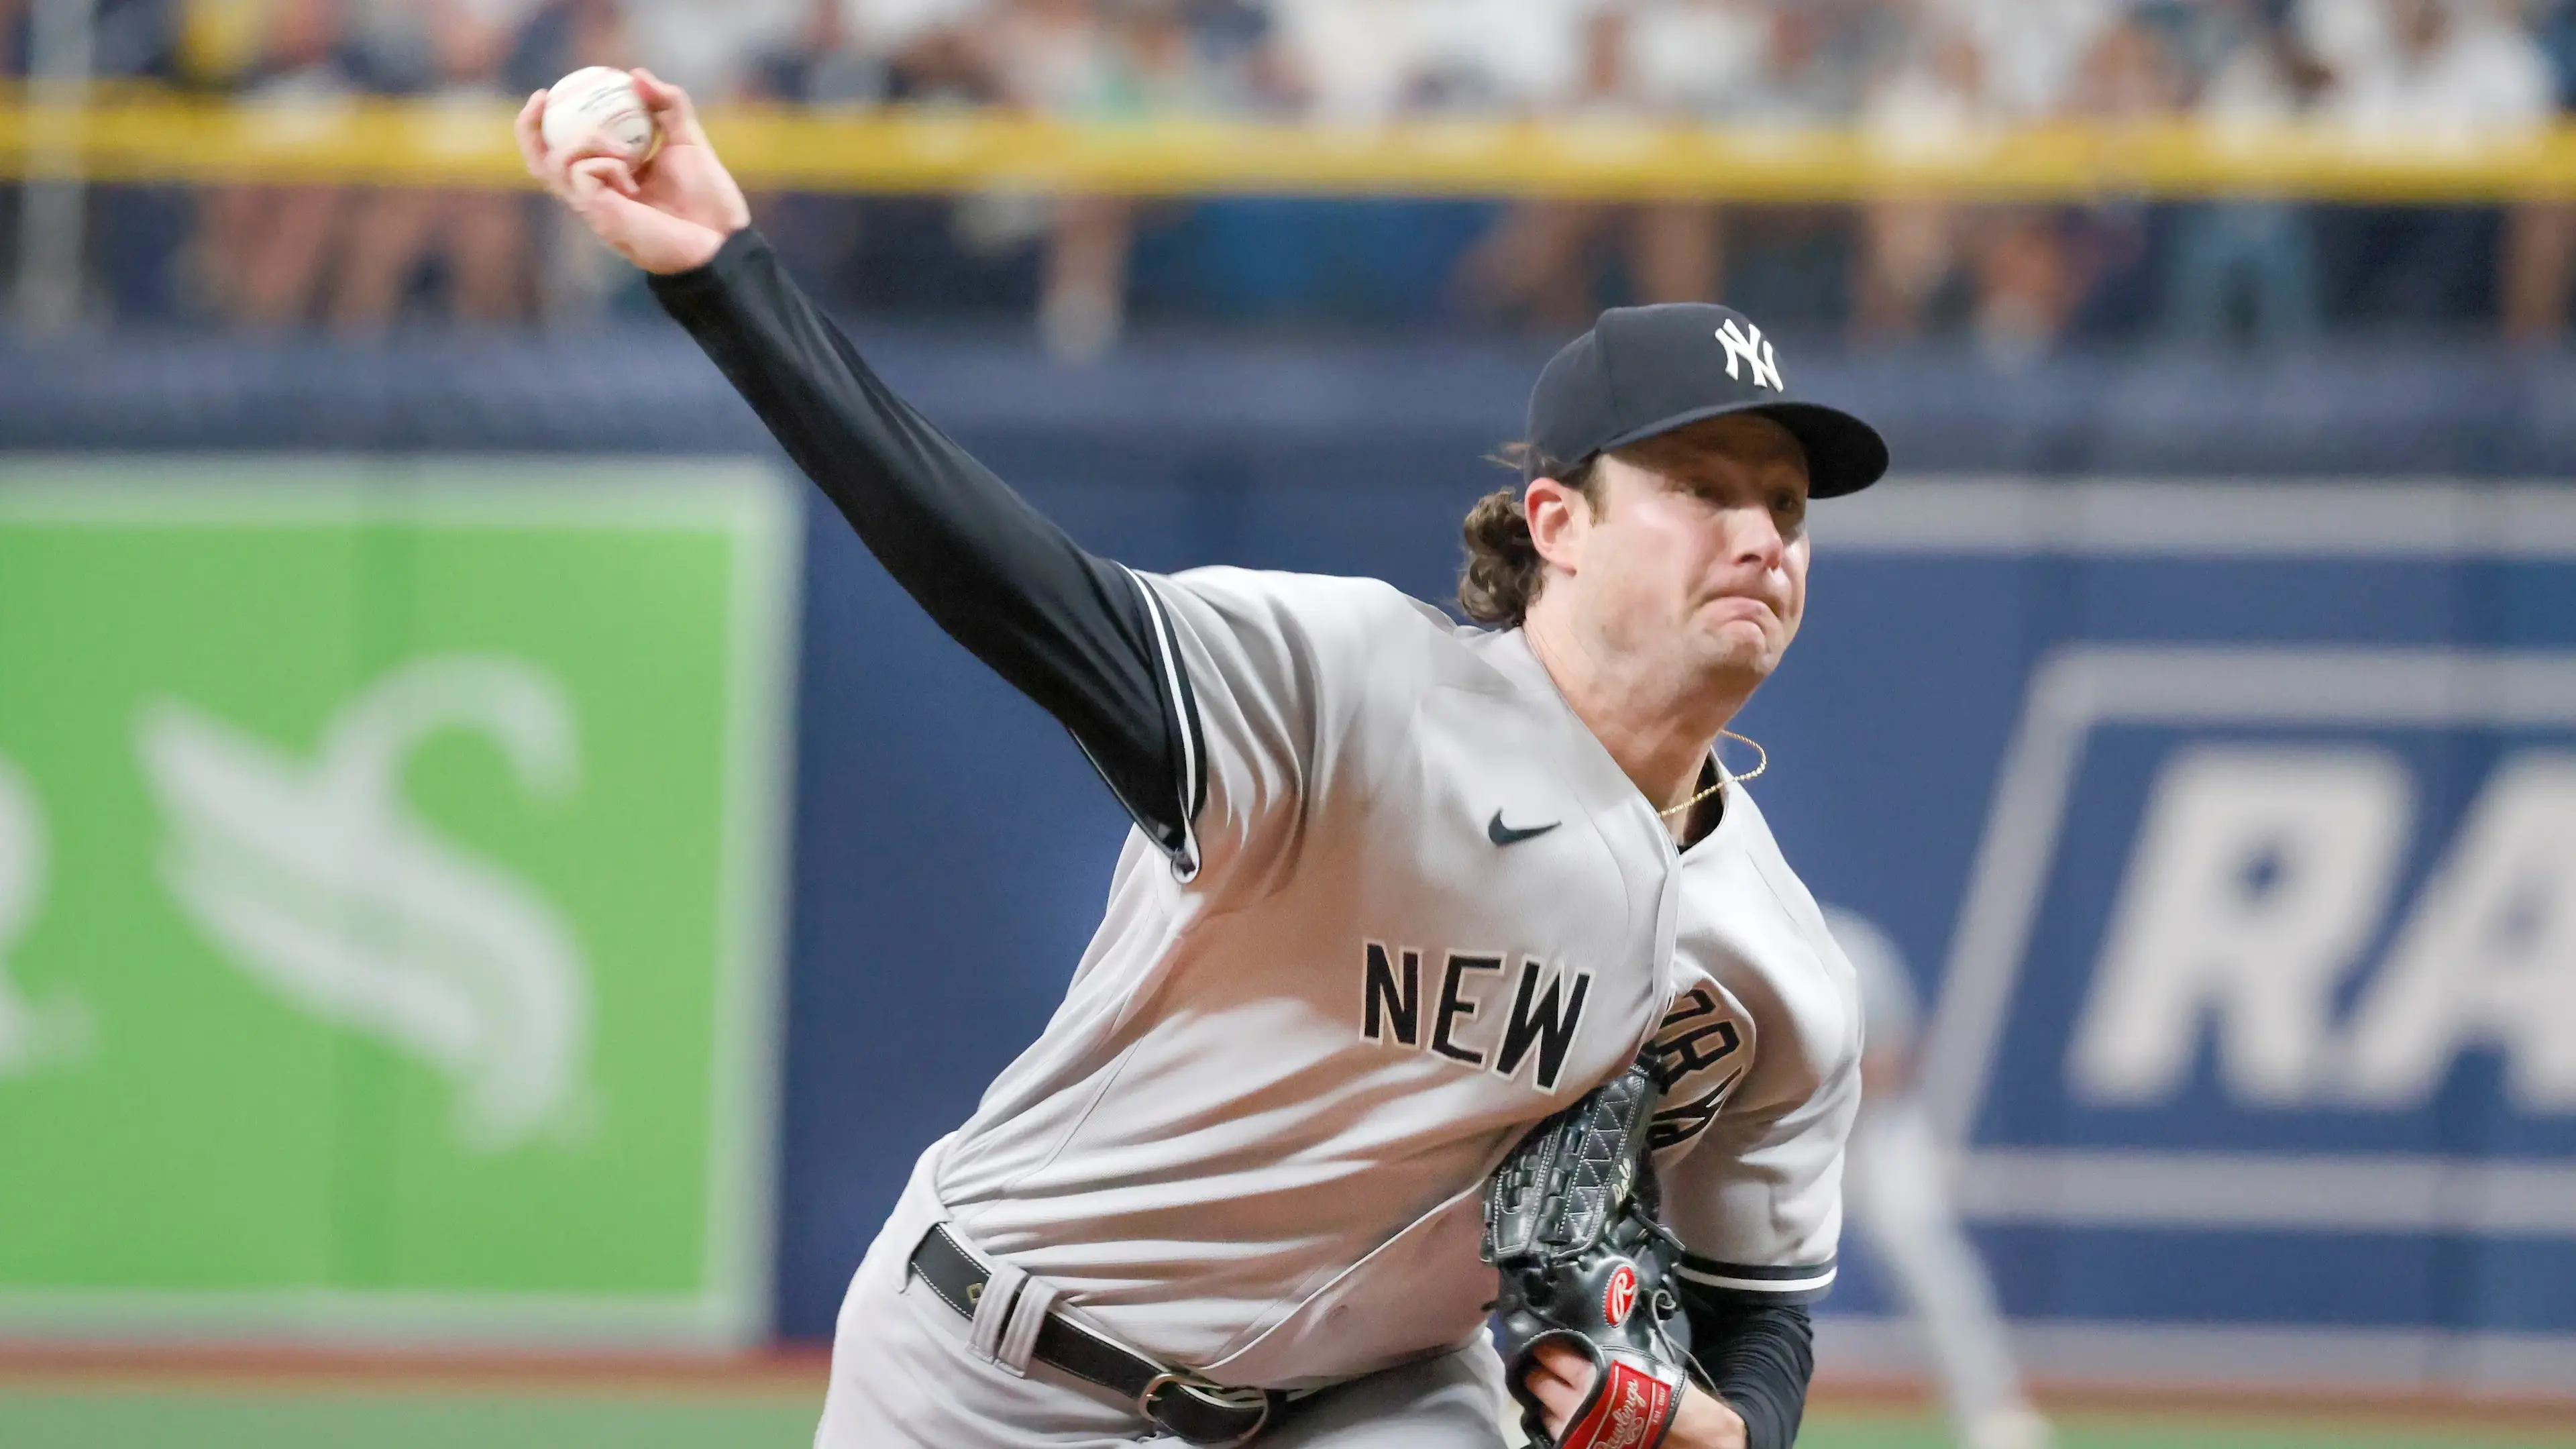 May 28, 2022; St. Petersburg, Florida, USA; New York Yankees starting pitcher Gerrit Cole (45) throws a pitch during the first inning against the Tampa Bay Rays at Tropicana Field. Mandatory Credit: Reinhold Matay-USA TODAY Sports / Reinhold Matay-USA TODAY Sports